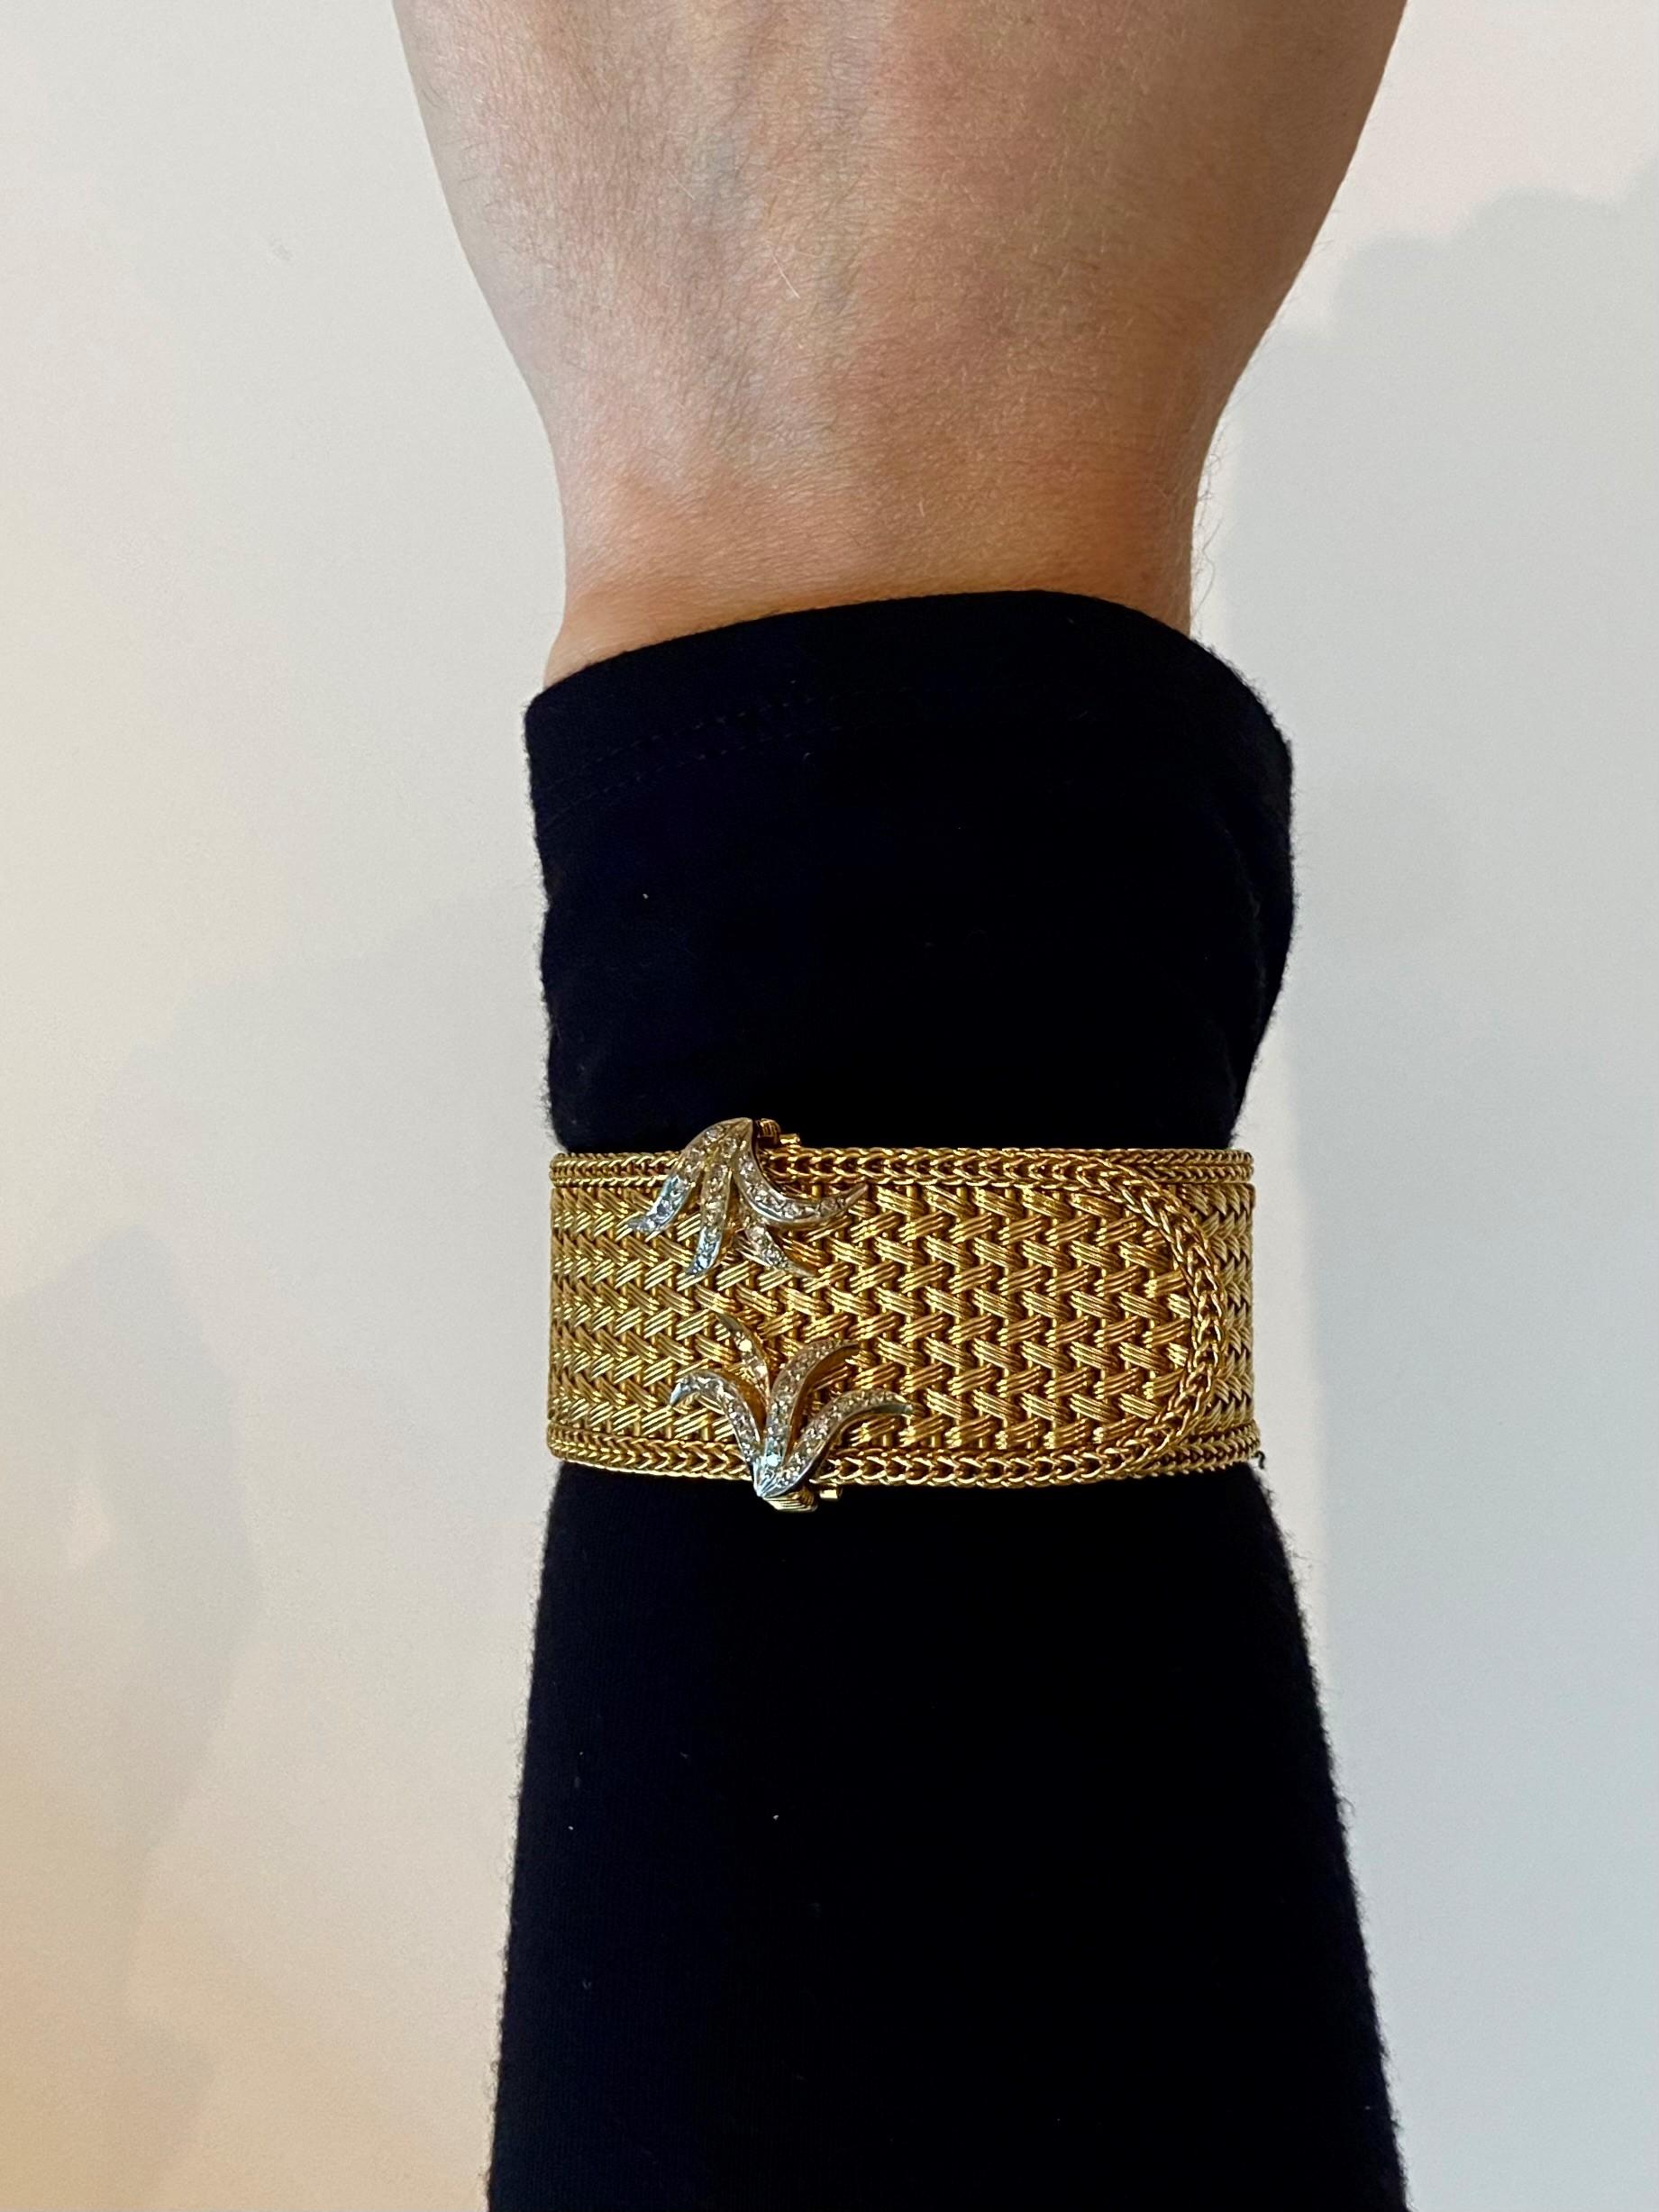 A French mid century mesh buckle bracelet.

Beautiful piece with exceptional craftsmanship made in France during the post war period, circa 1950. This flexible mesh buckle bracelet has been crafted in solid yellow gold of 18 karats with platinum